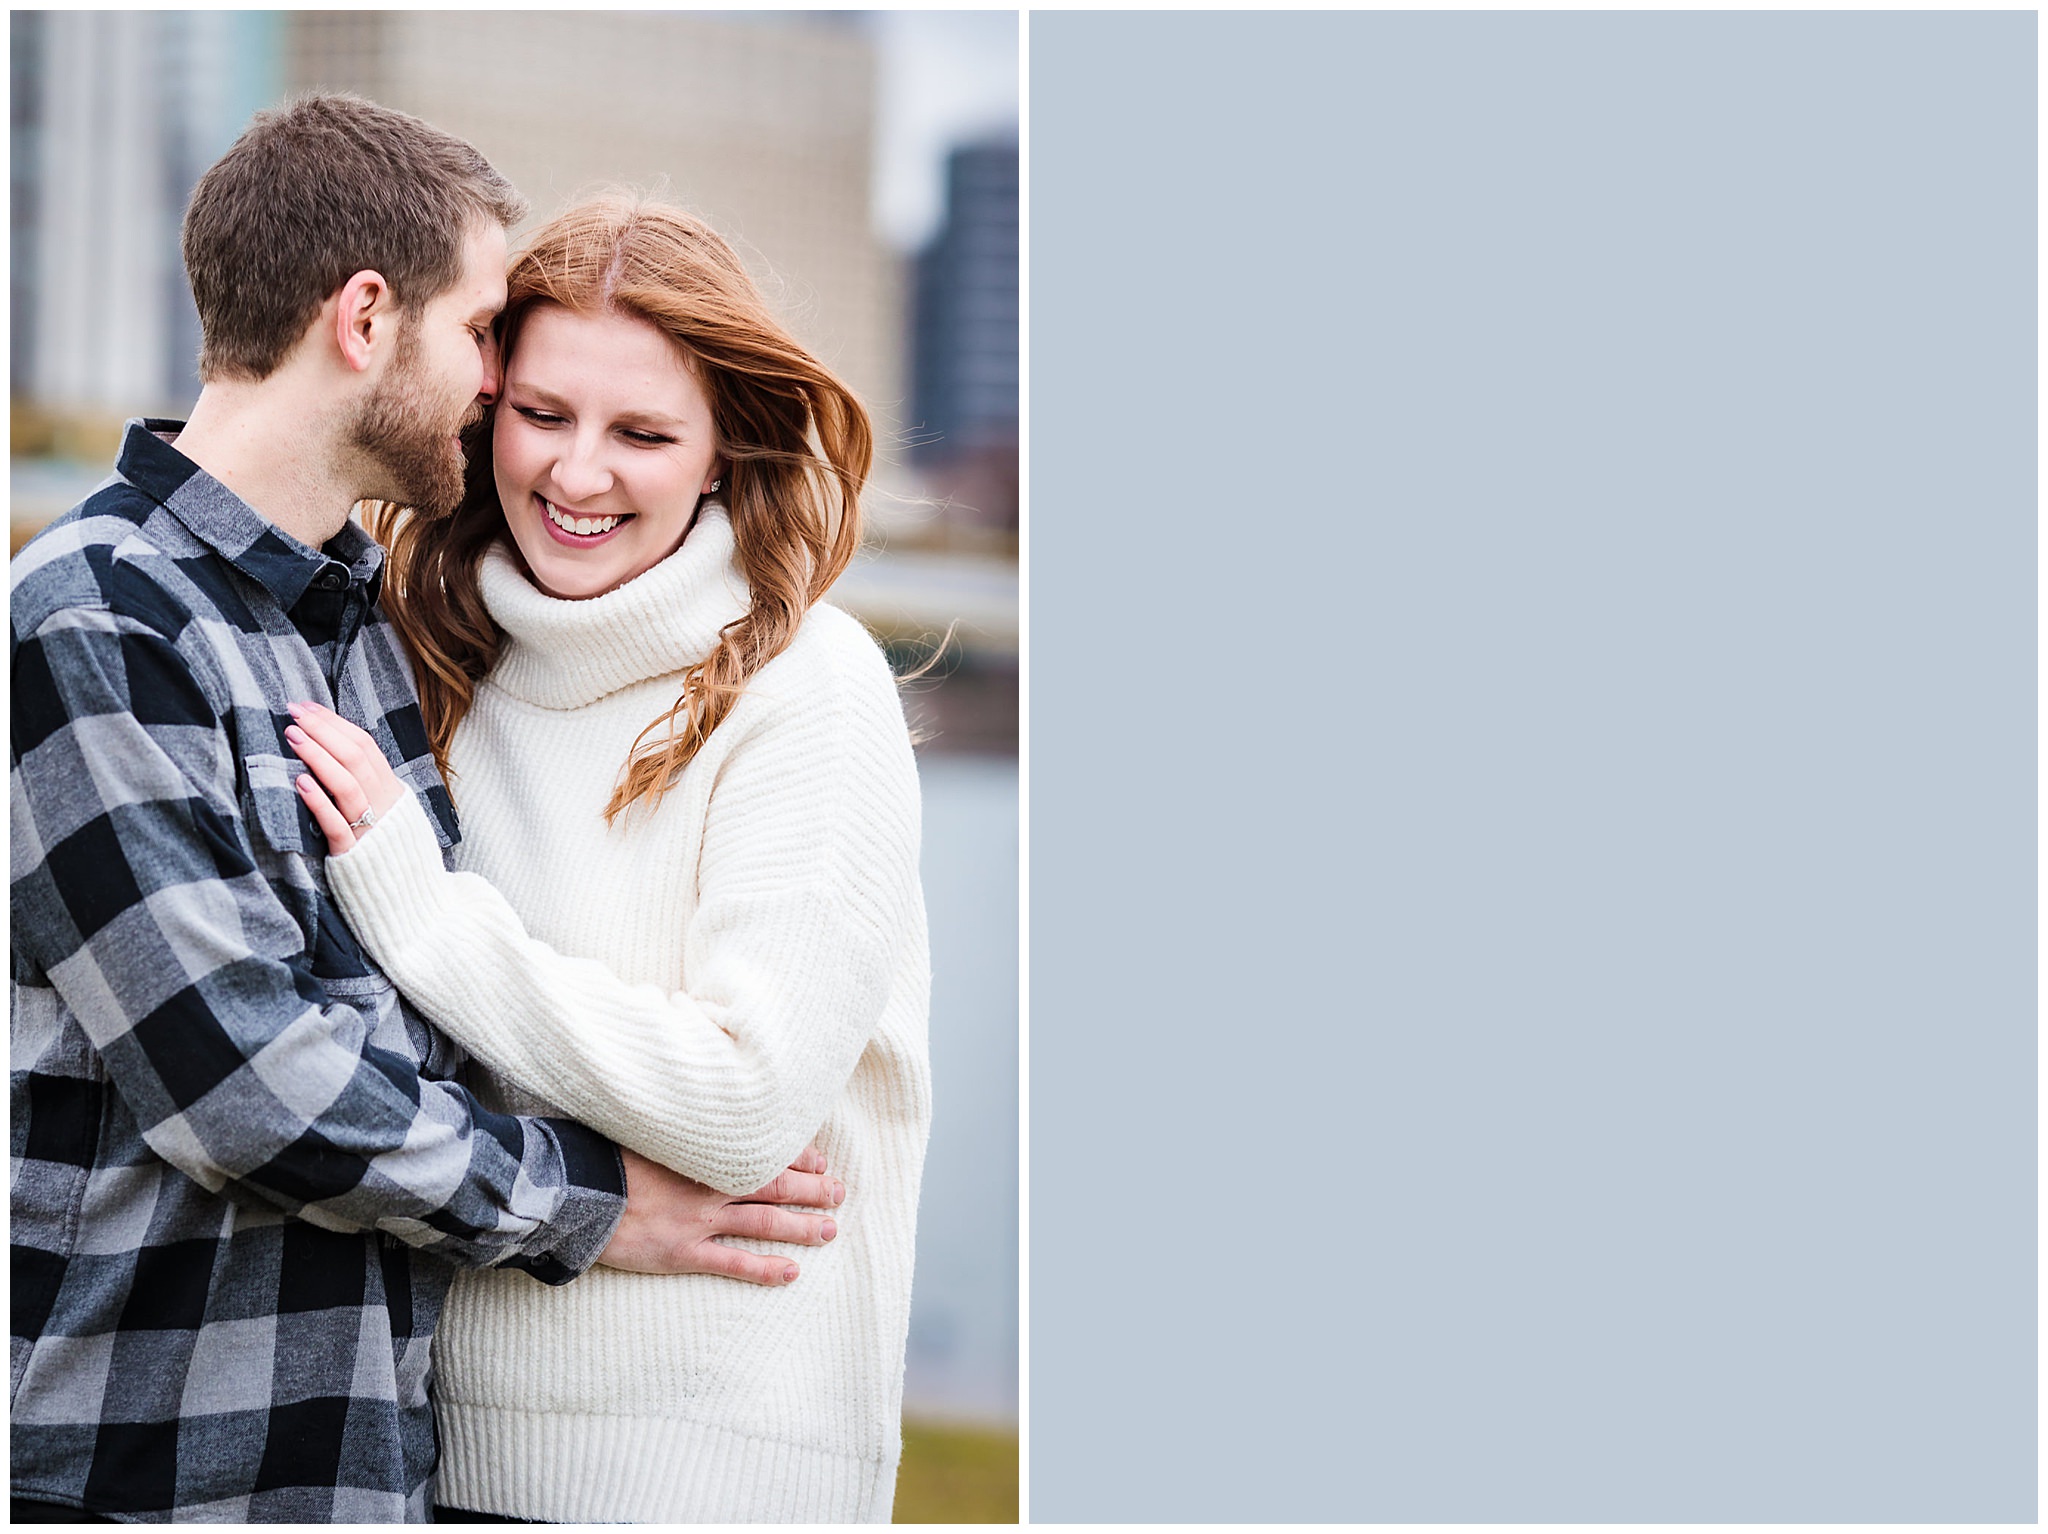 Groom-to-be whispers in his fiance's ear during a North Shore engagement session in Pittsburgh, PA